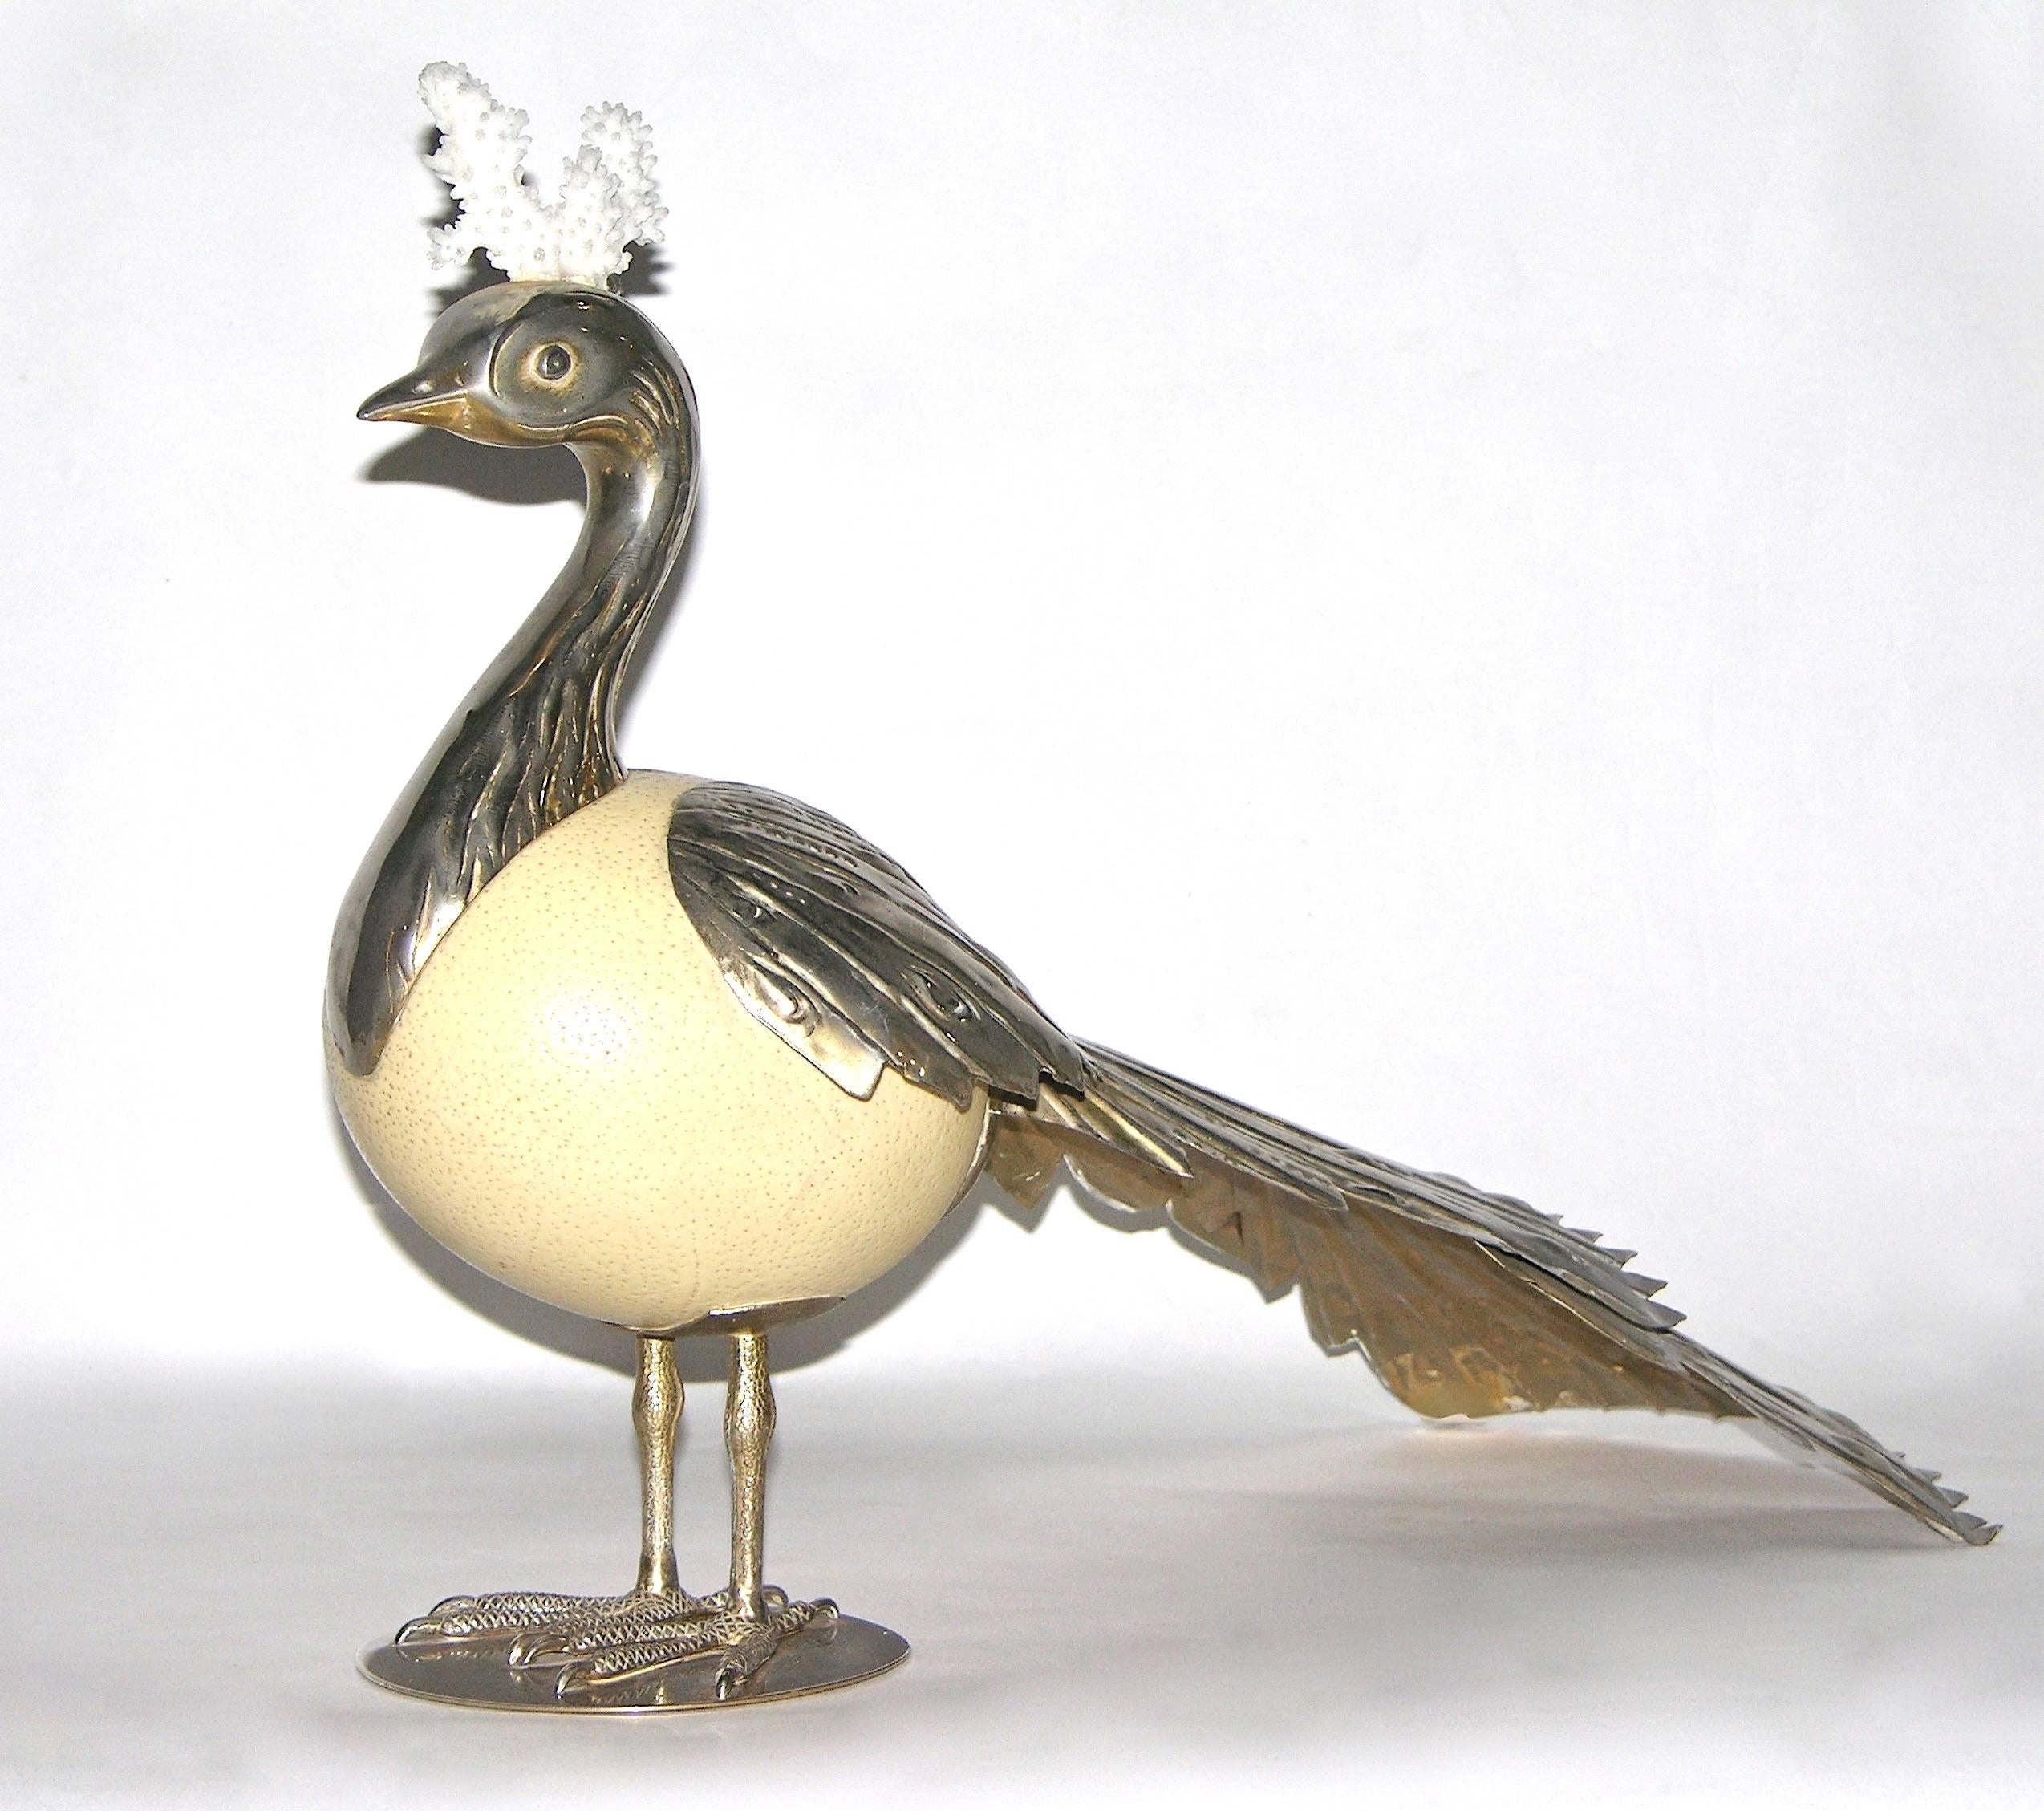 This one-of-a-kind Work of Art, sculpture bird by Antonio Pavia is a rare object, entirely handcrafted, with an ostrich egg as the body, decorated with an impressive chased silver plated long feathered tail and topped with white coral. The quality